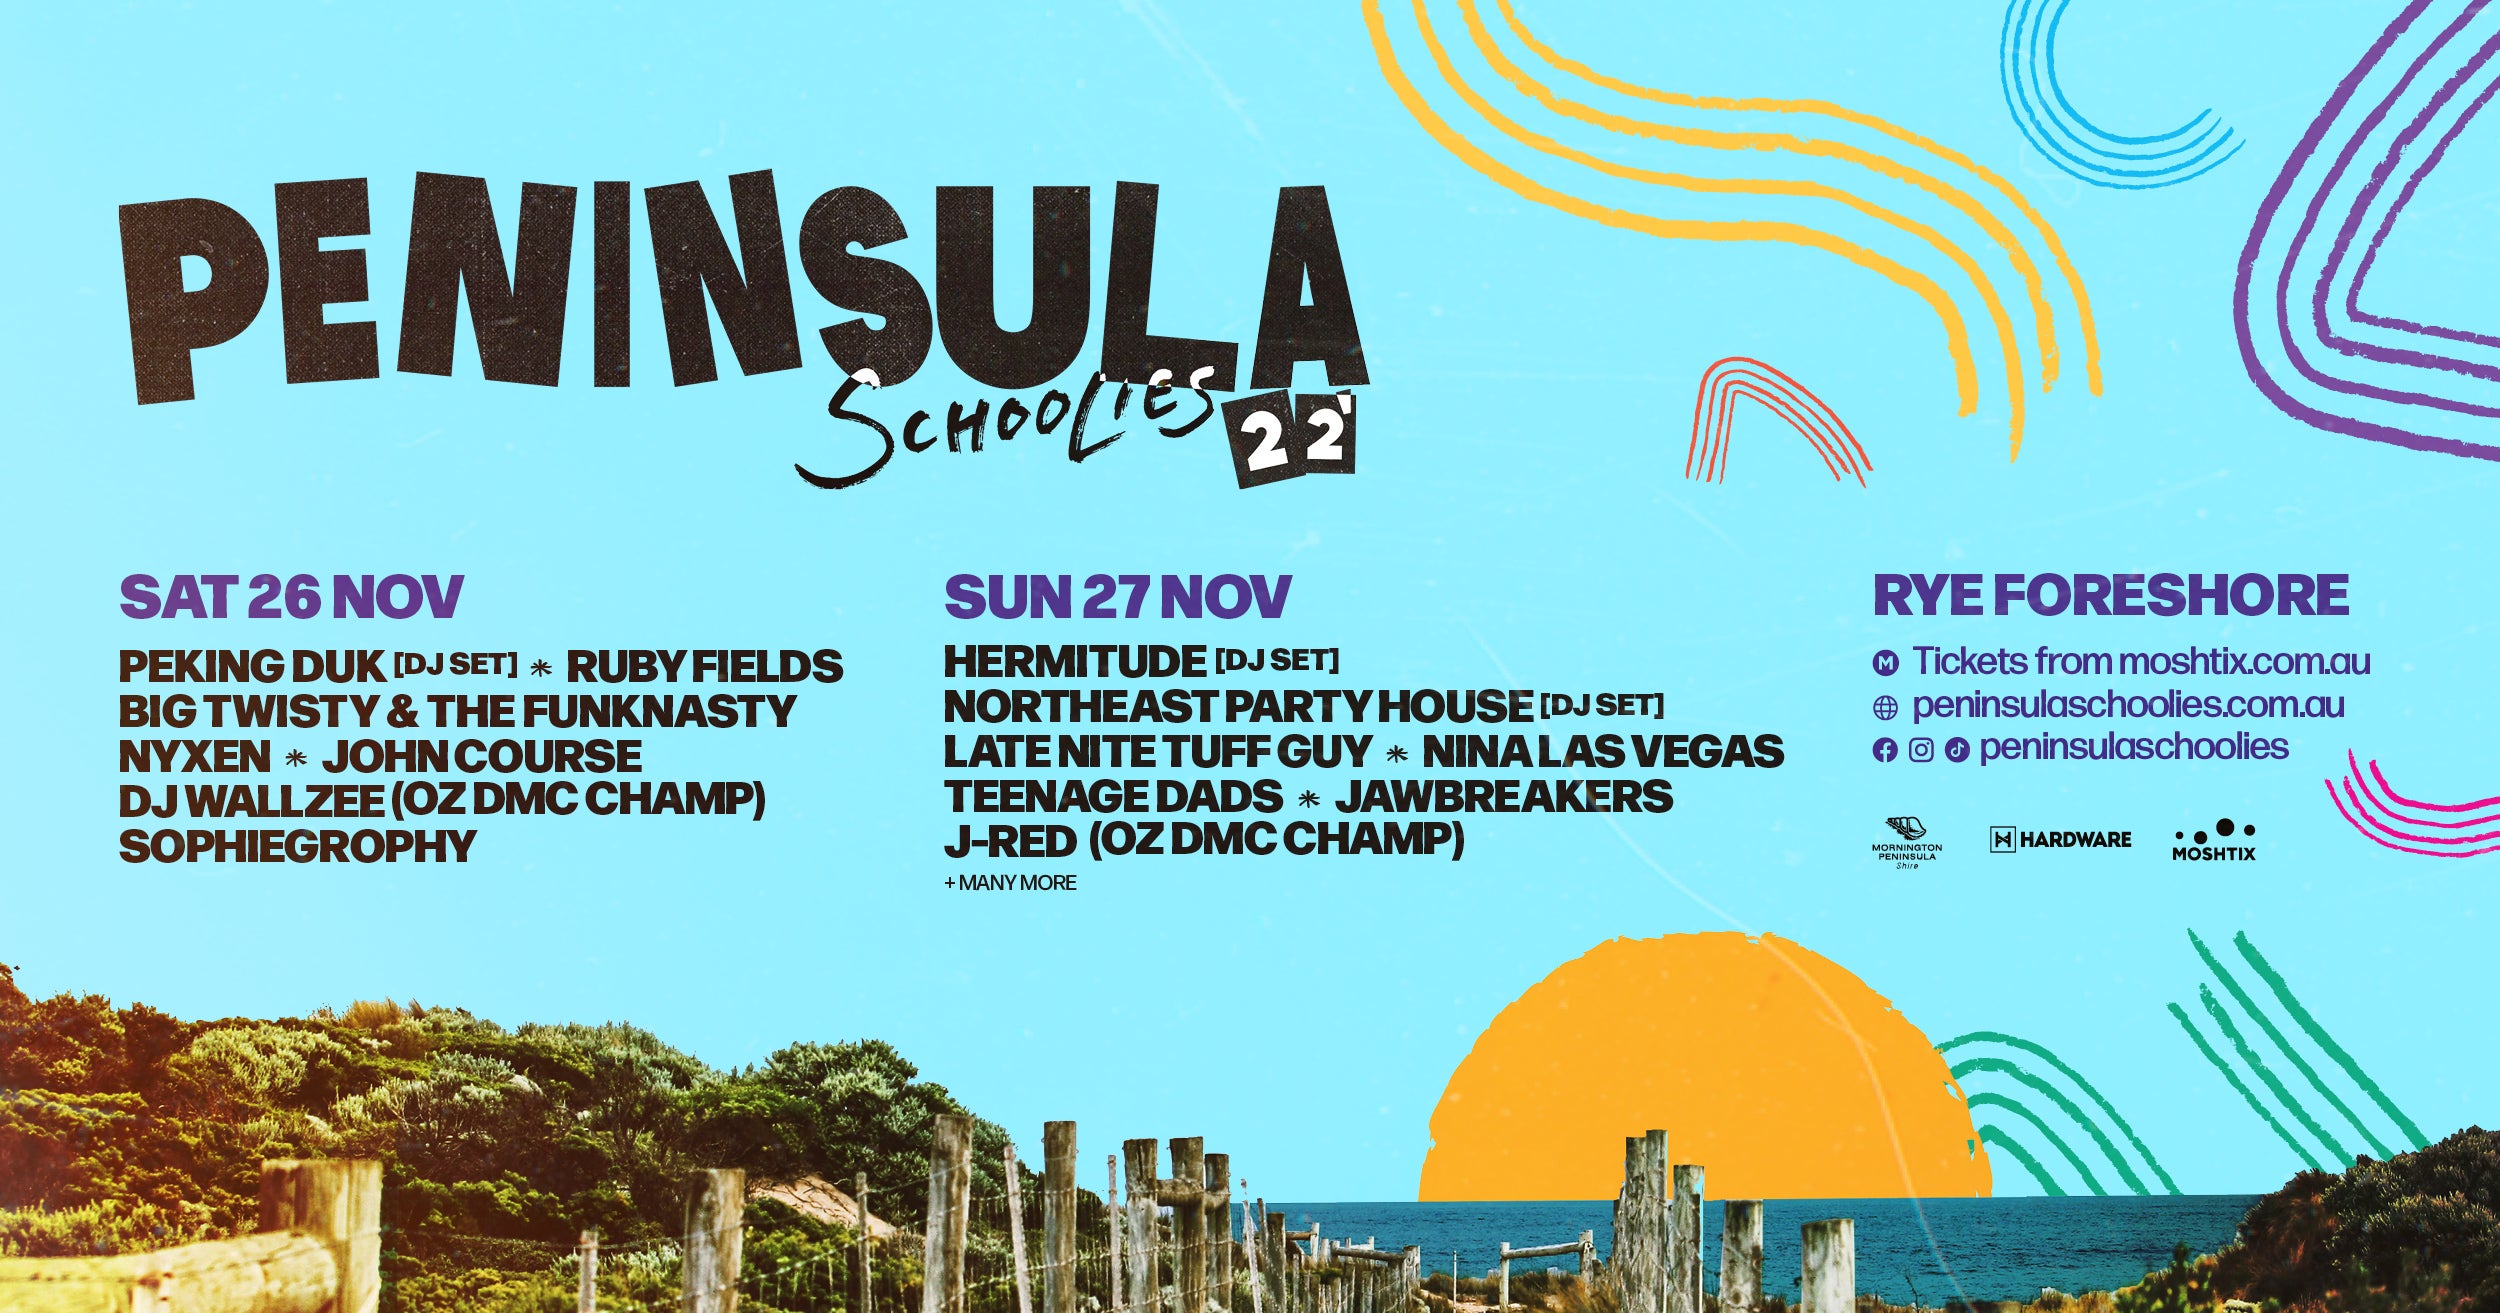 Peninsula Schoolies Returns For 2022 With A Massive Lineup